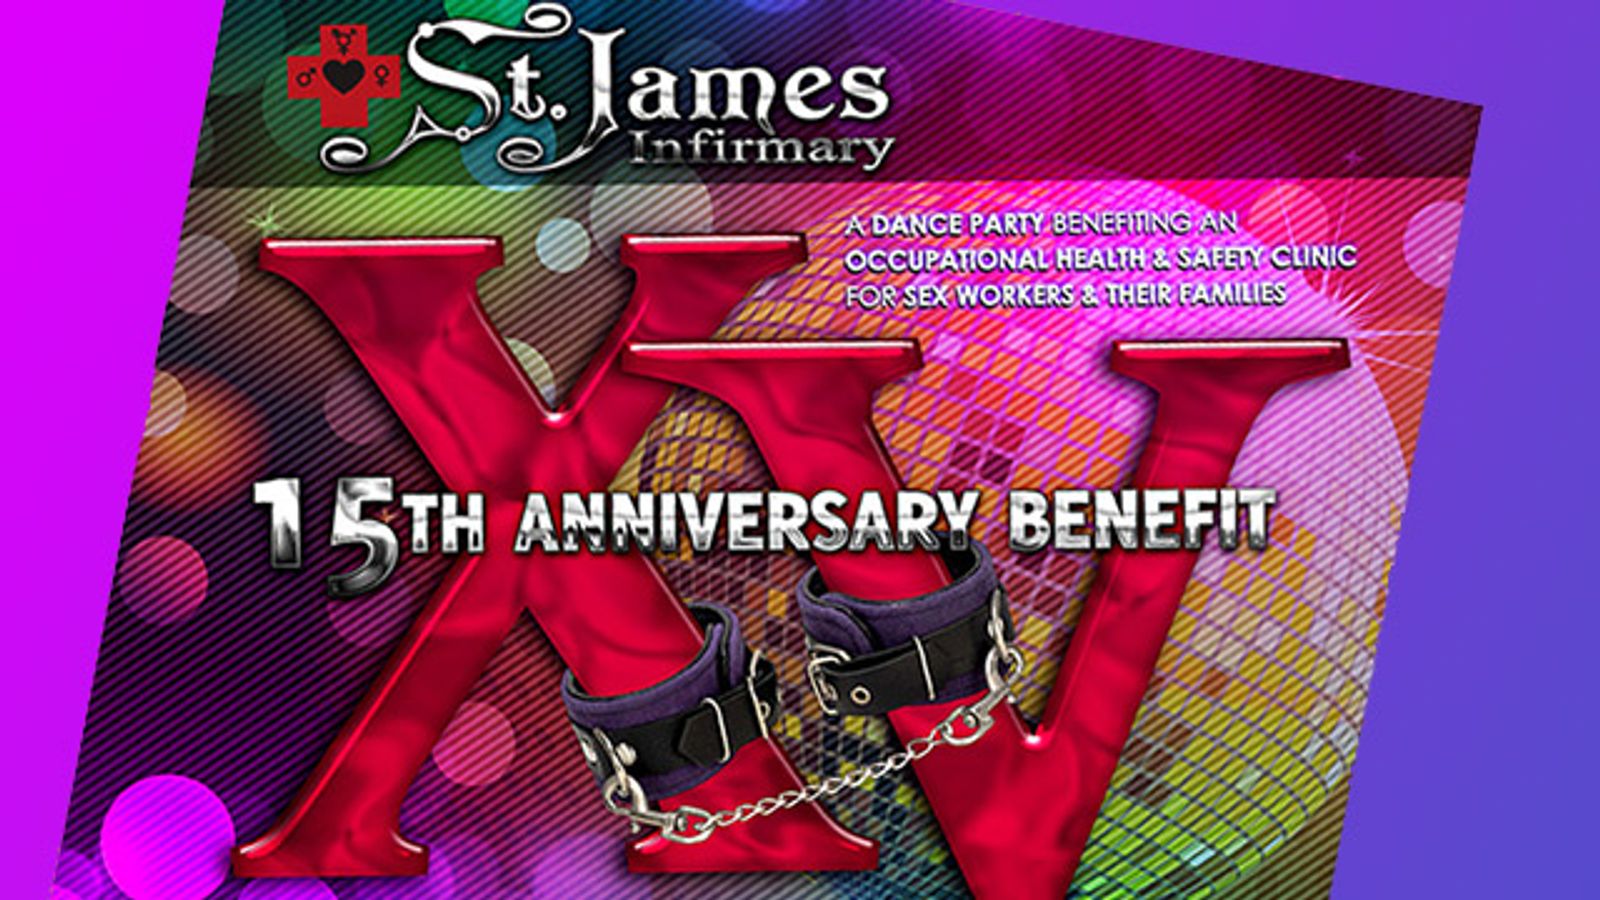 St. James Infirmary Presents XV Dirty Dance Party Fundraiser